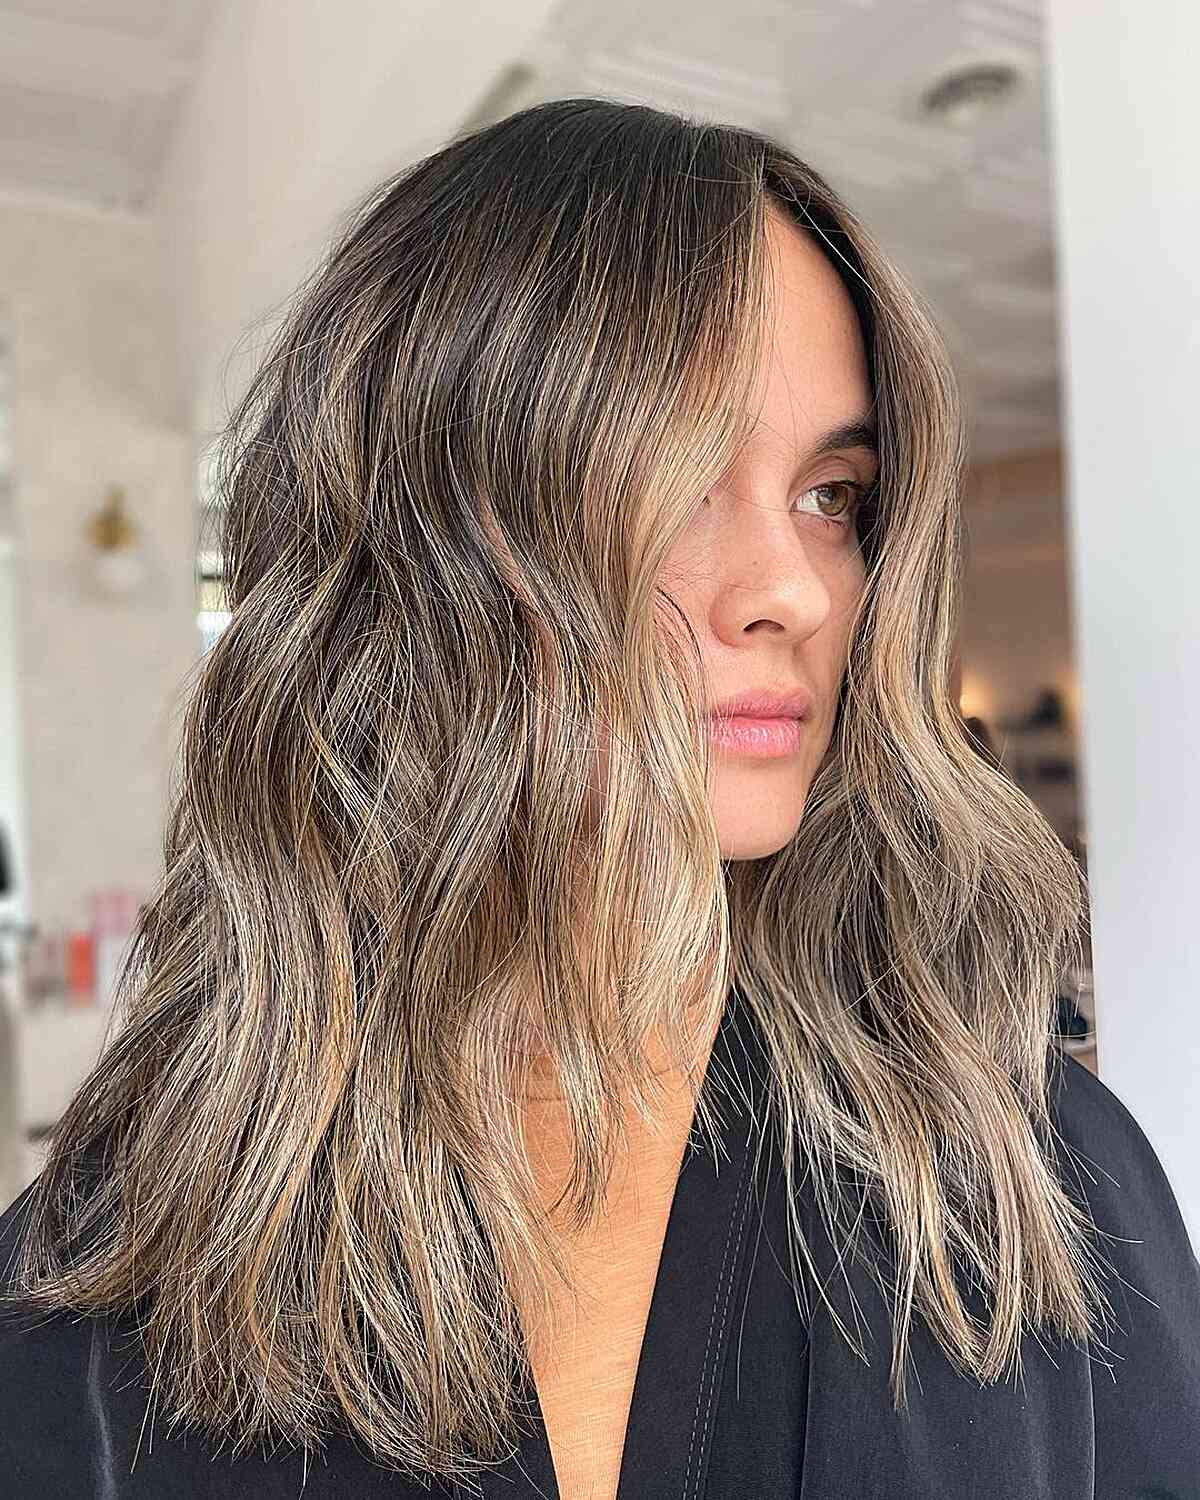 Effortless Hawaiian Beachy Waves with Textured Ends for Mid-Length Hair